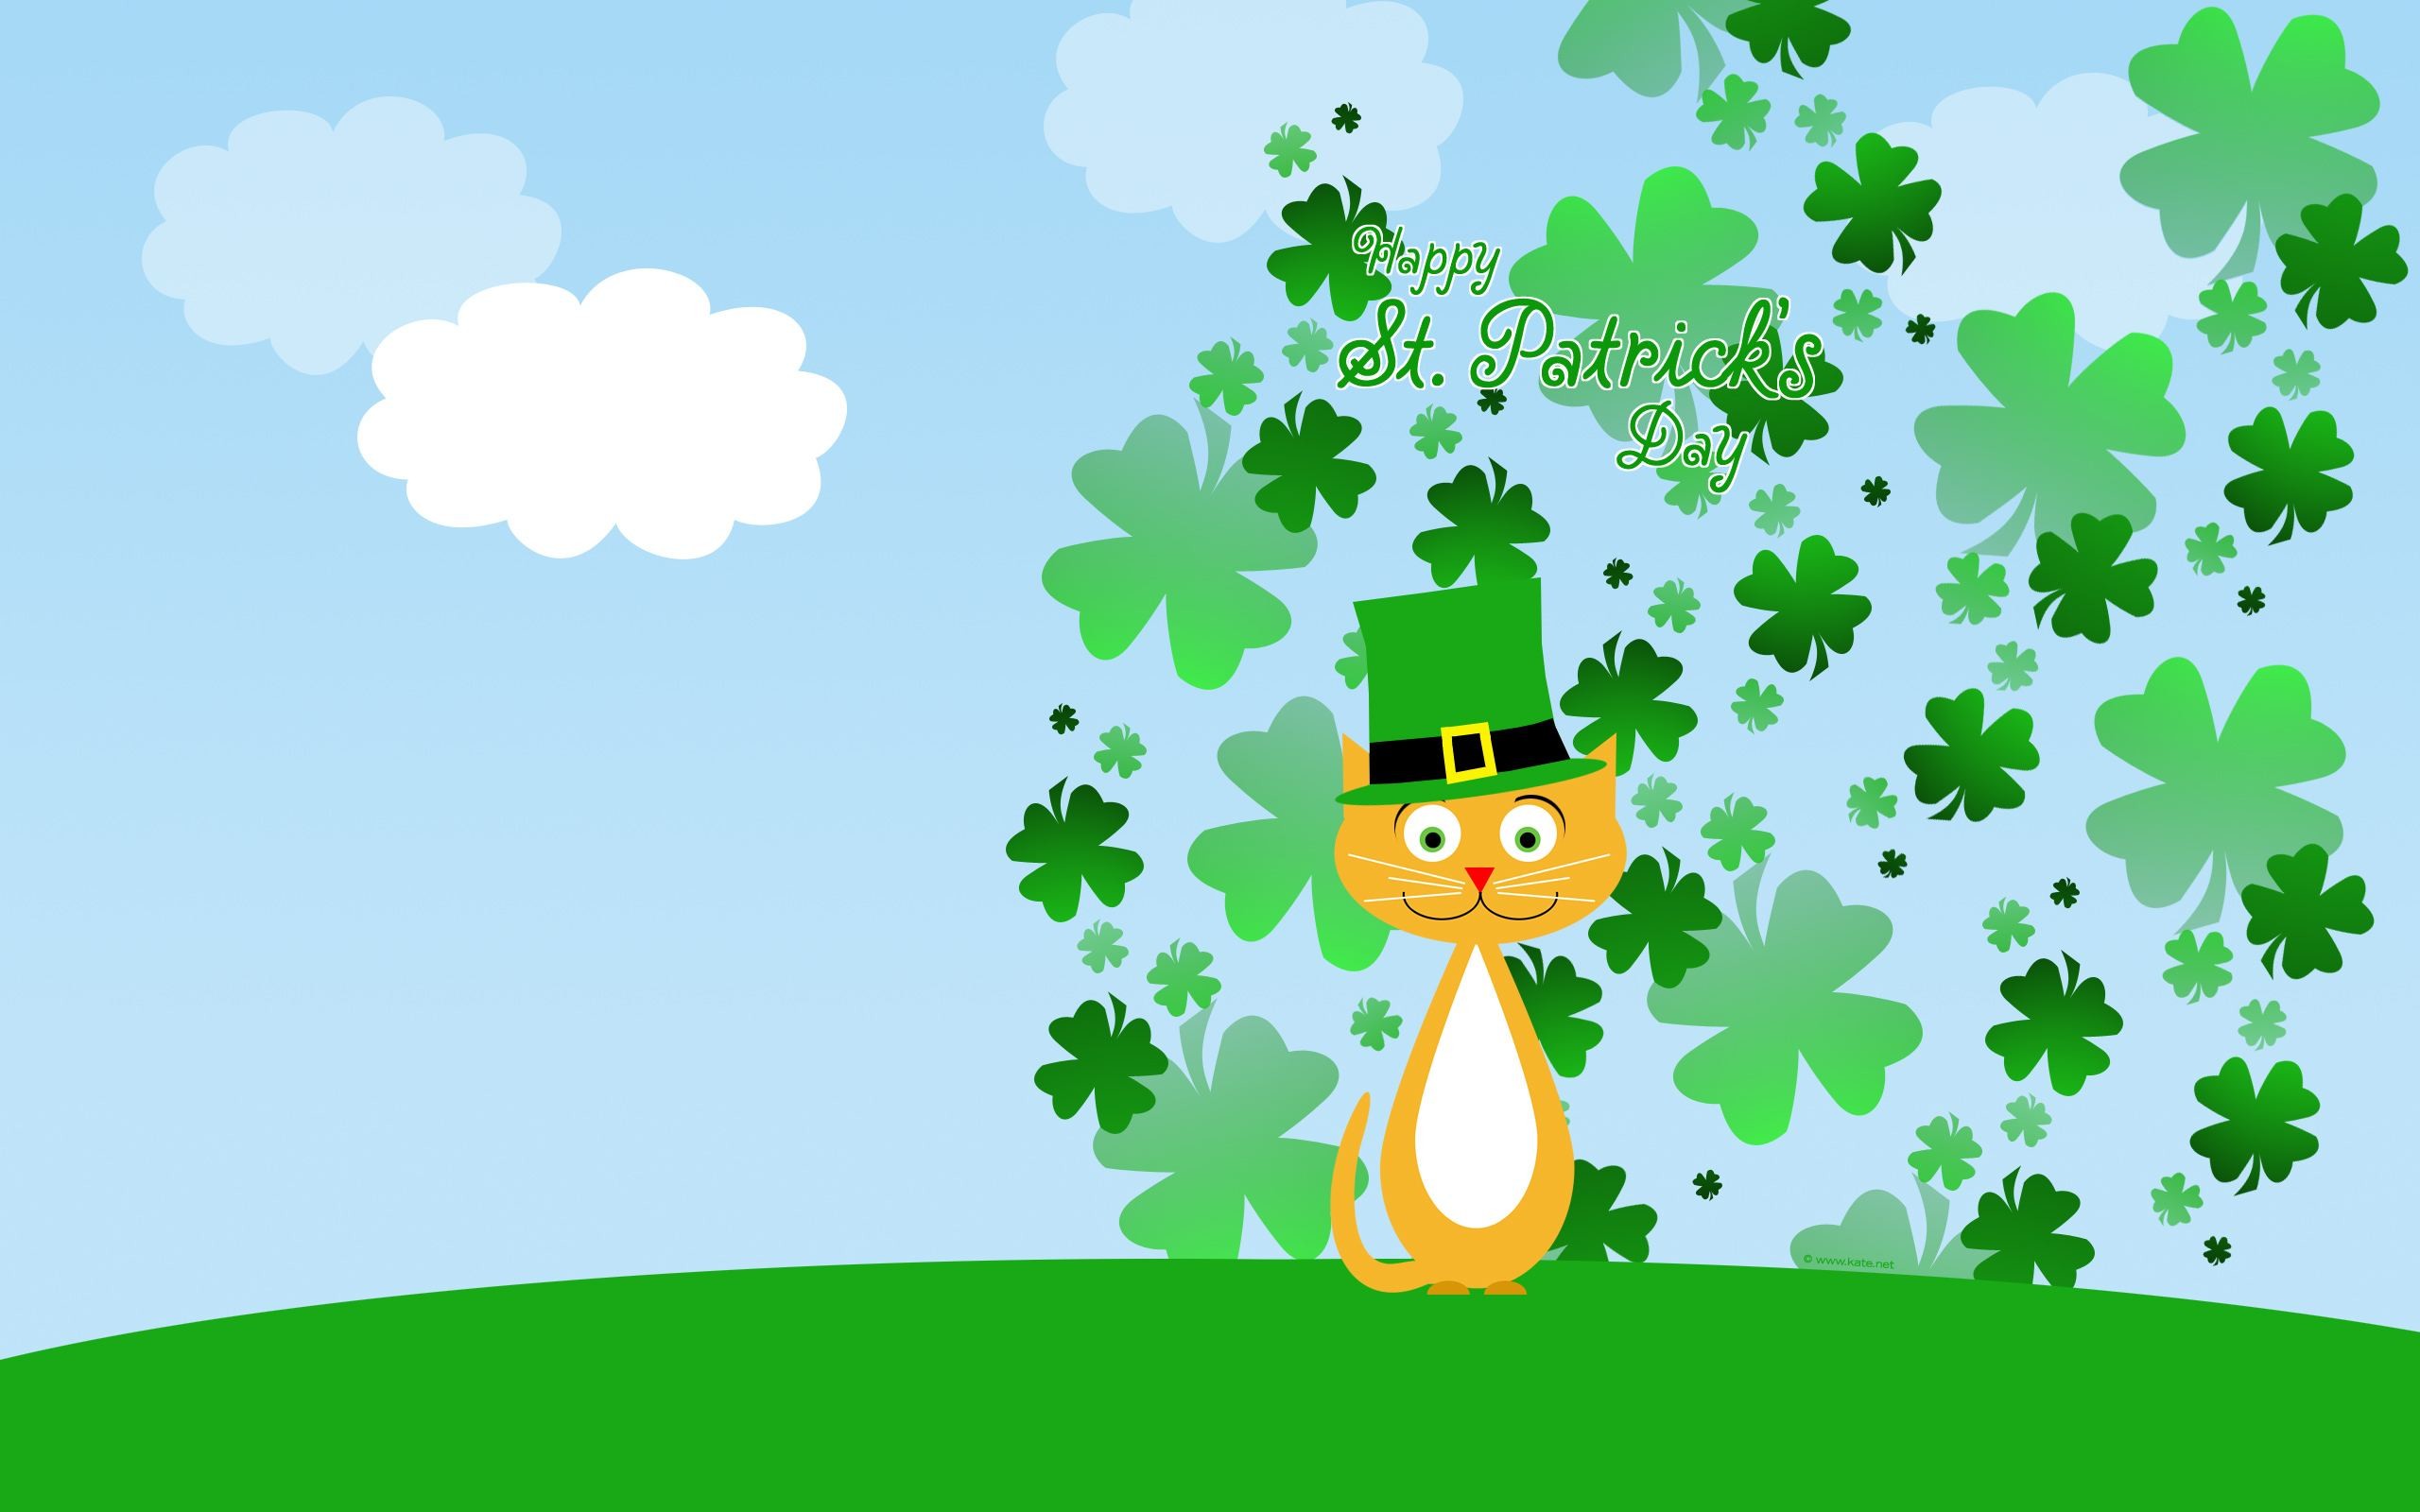 Images Fit Perfectly In Your Computer Screen, They - St Patrick's Day  Desktop Background - 2560x1600 Wallpaper 